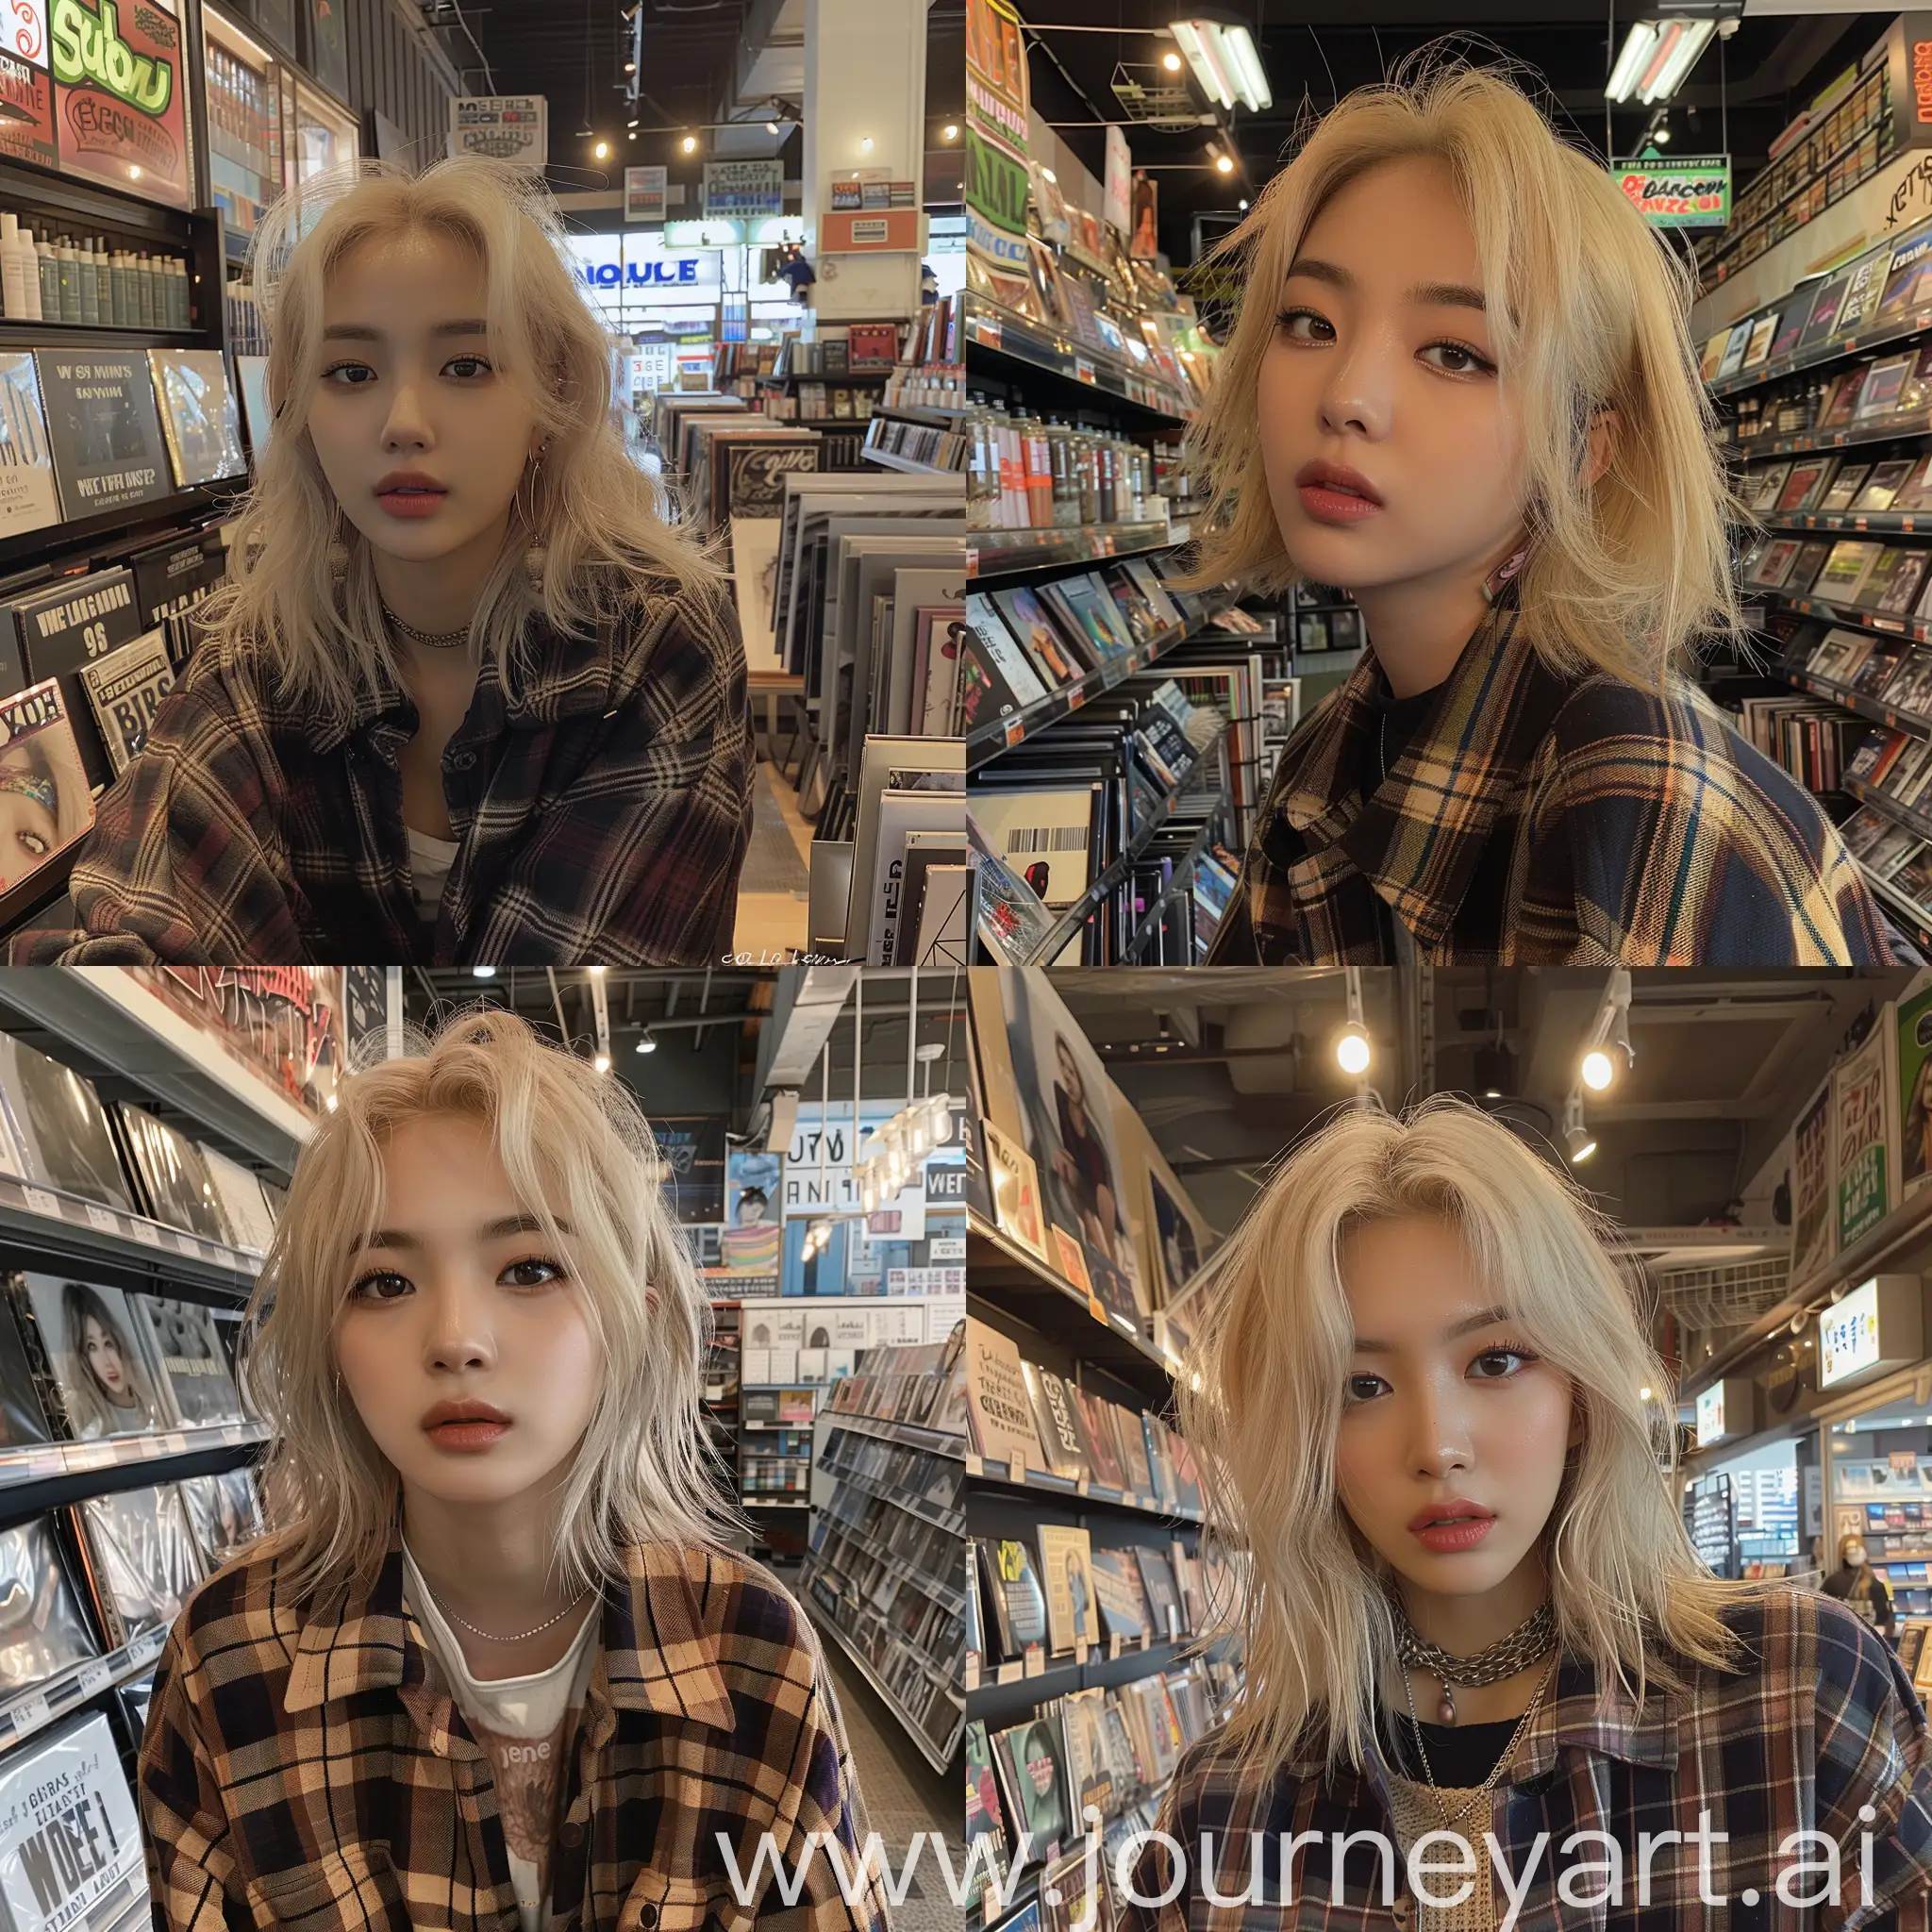 Jennie-from-BLACKPINK-with-Blonde-Wolfcut-Hair-in-Grunge-Aesthetic-Makeup-at-Album-Store